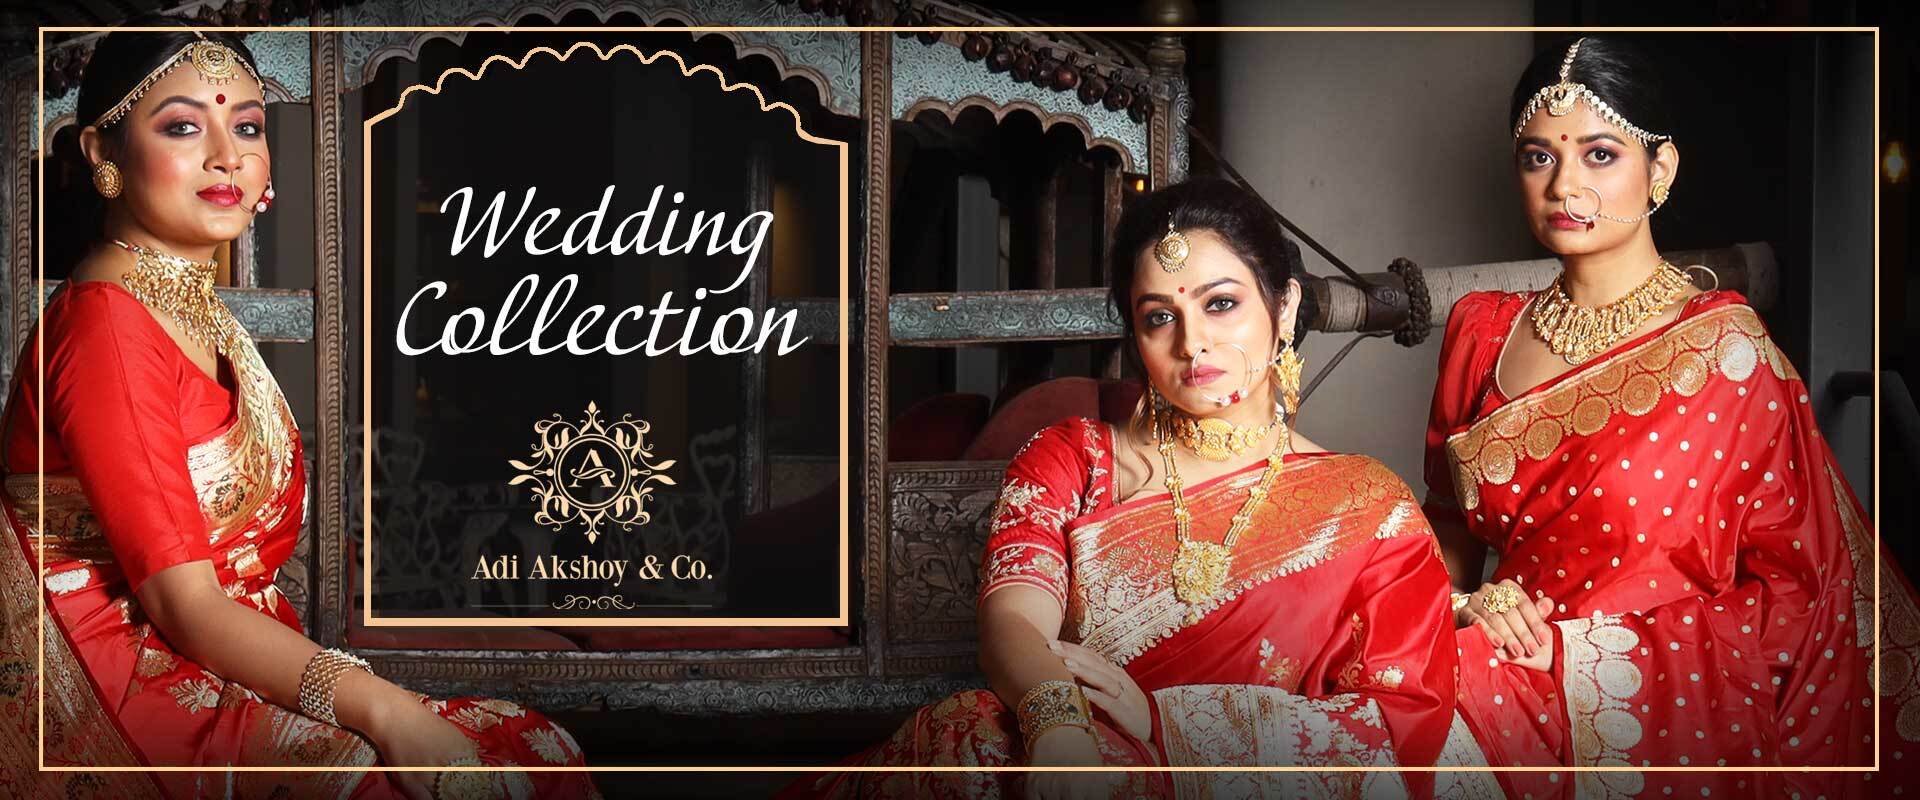 Wedding Collections